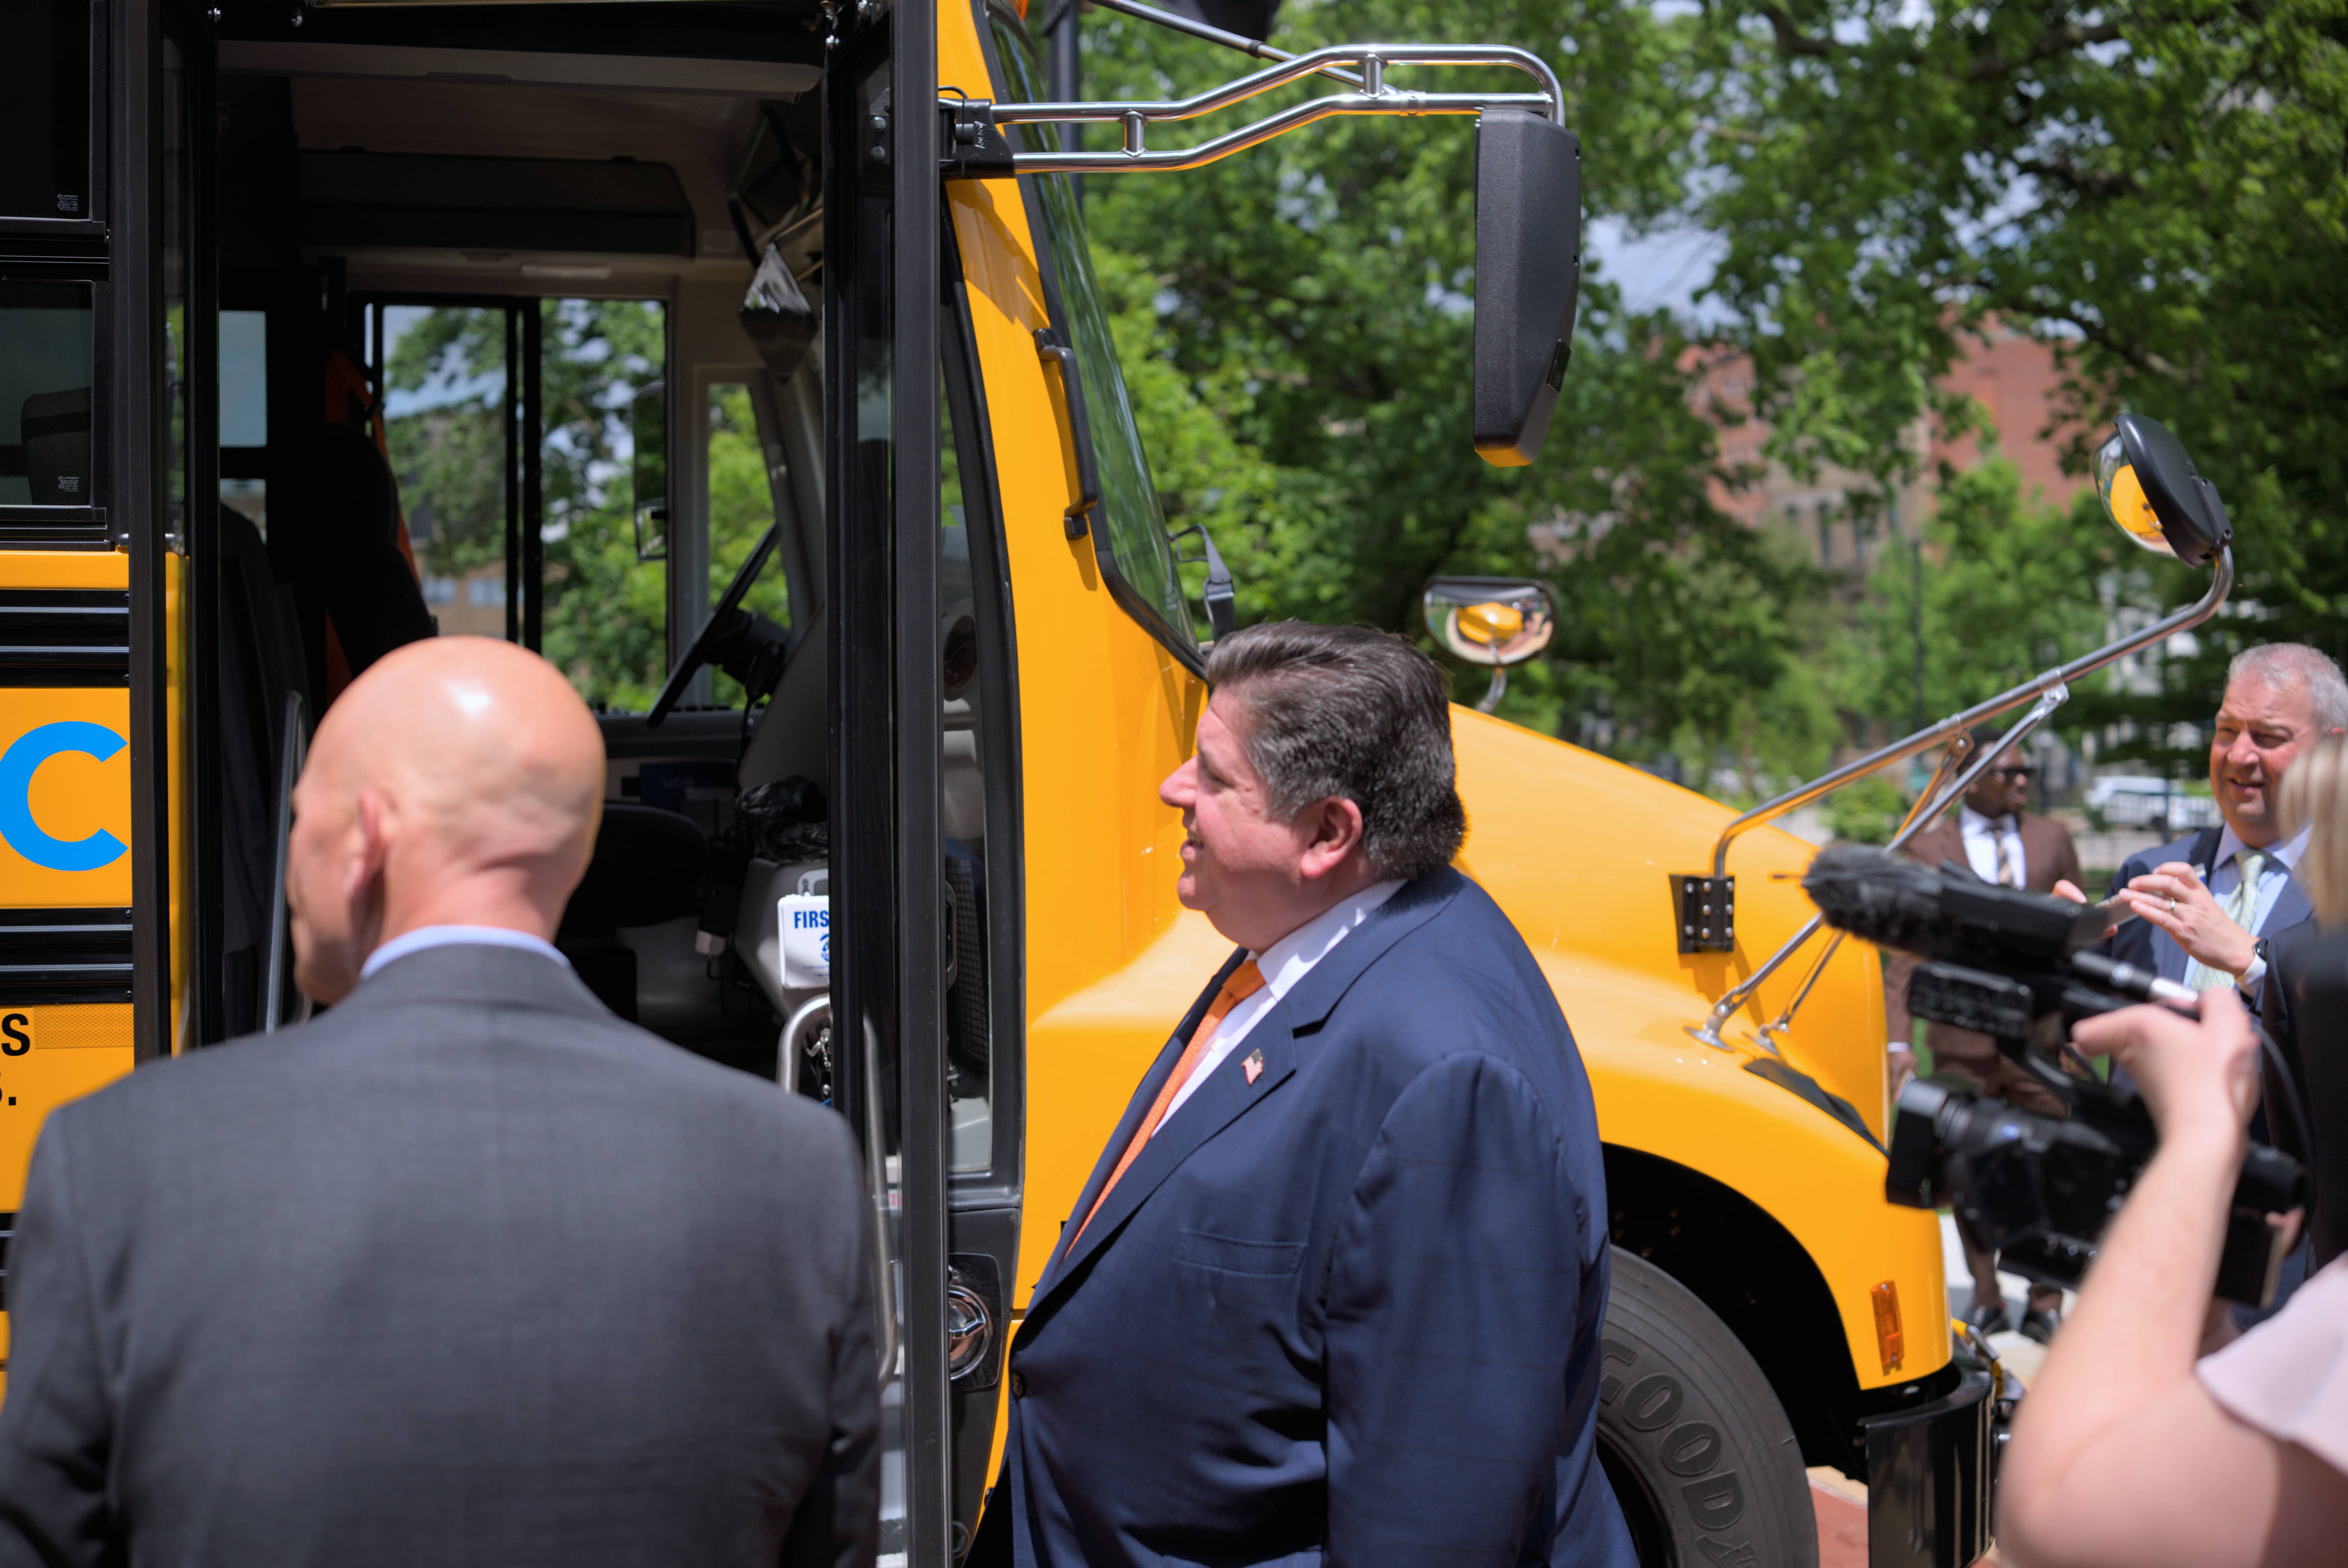 Governor Pritzker in front of electric school bus